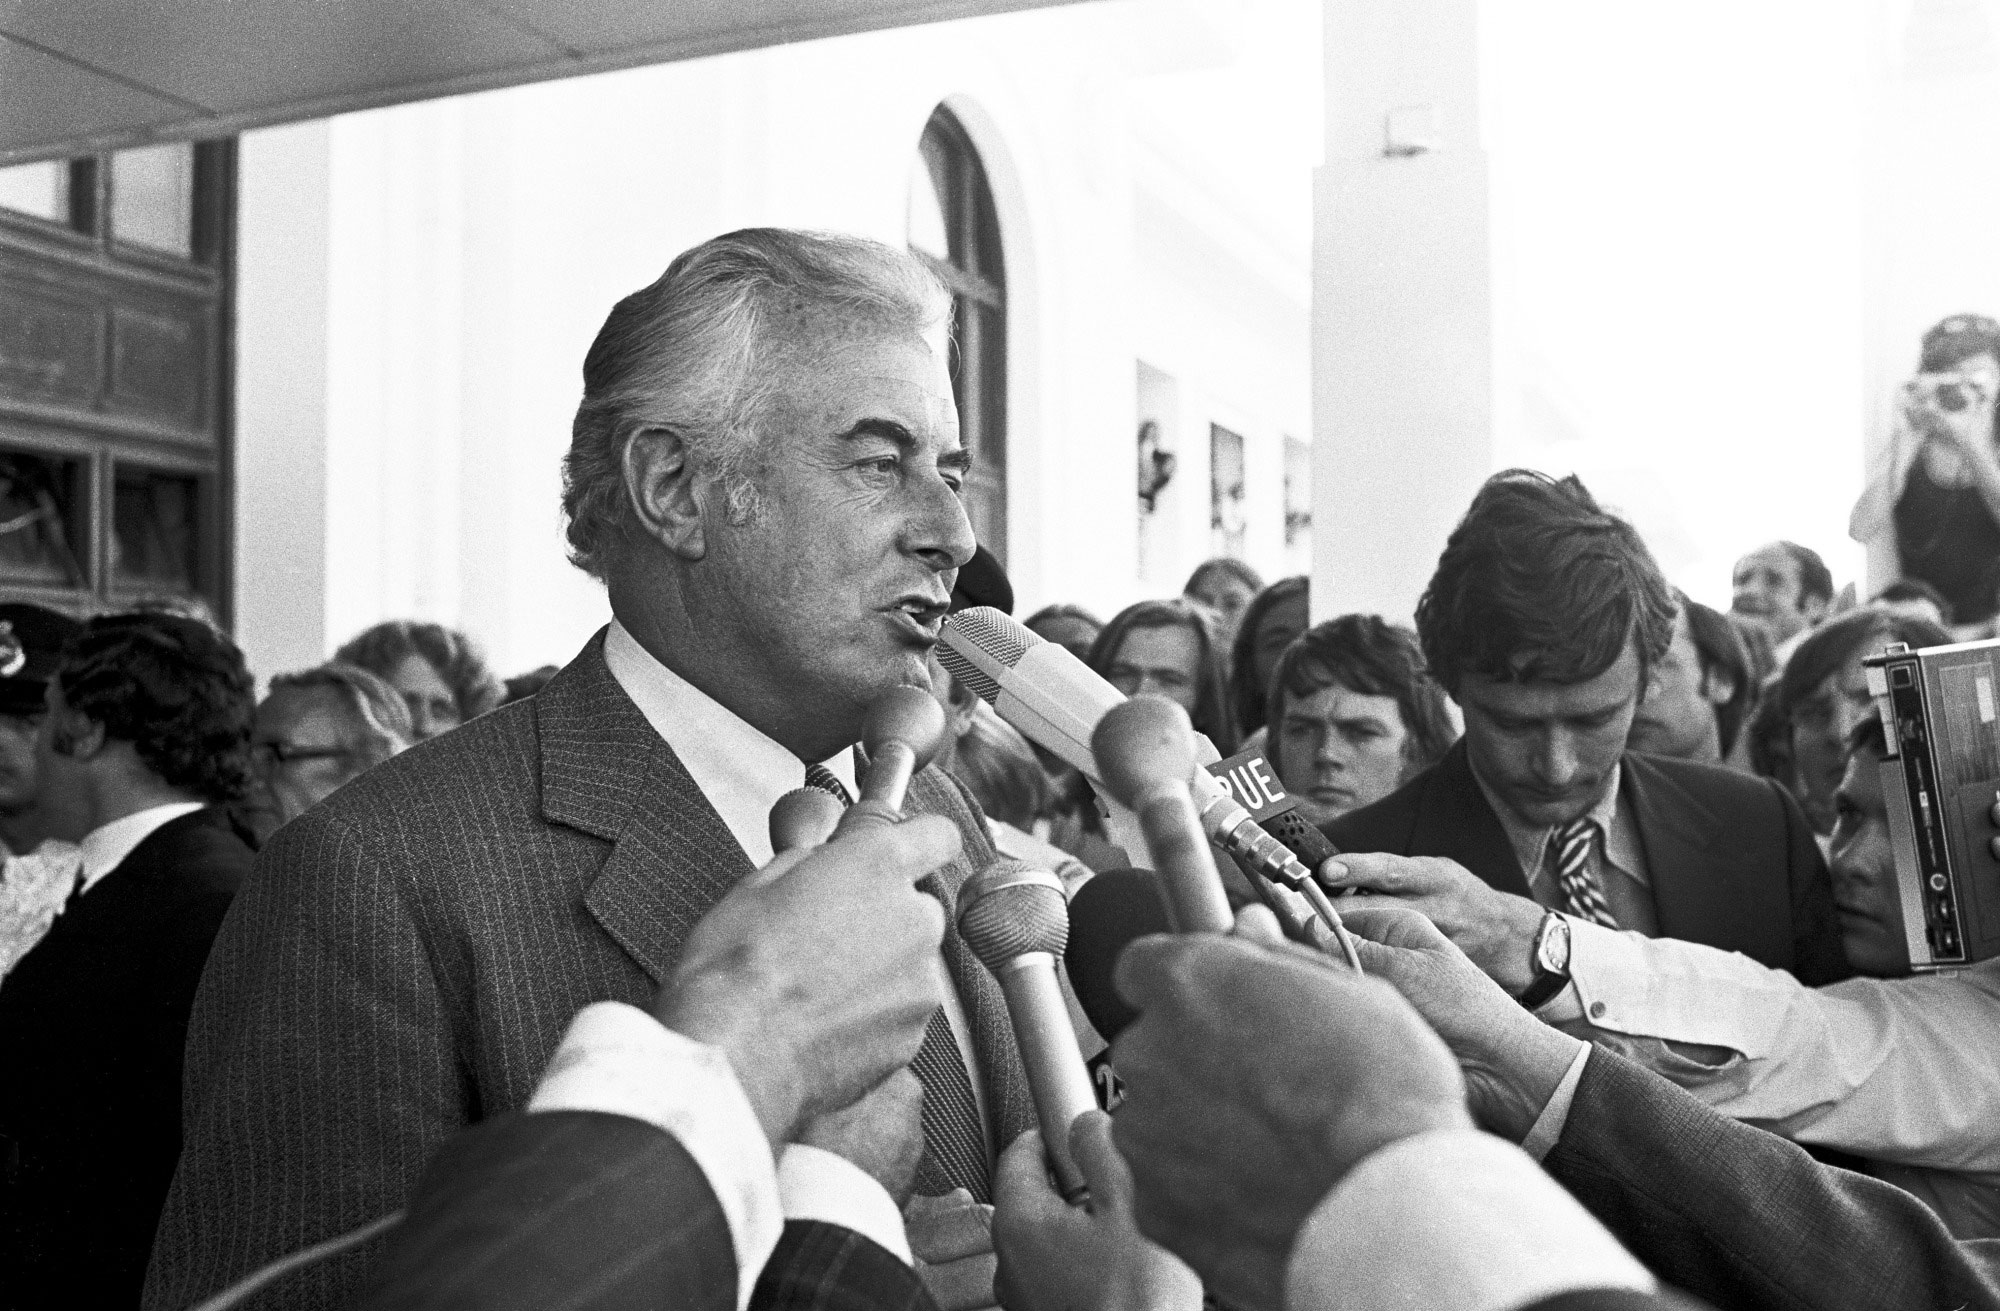 <p>Gough Whitlam speaking after the dismissal of his government, 11 November 1975</p>
